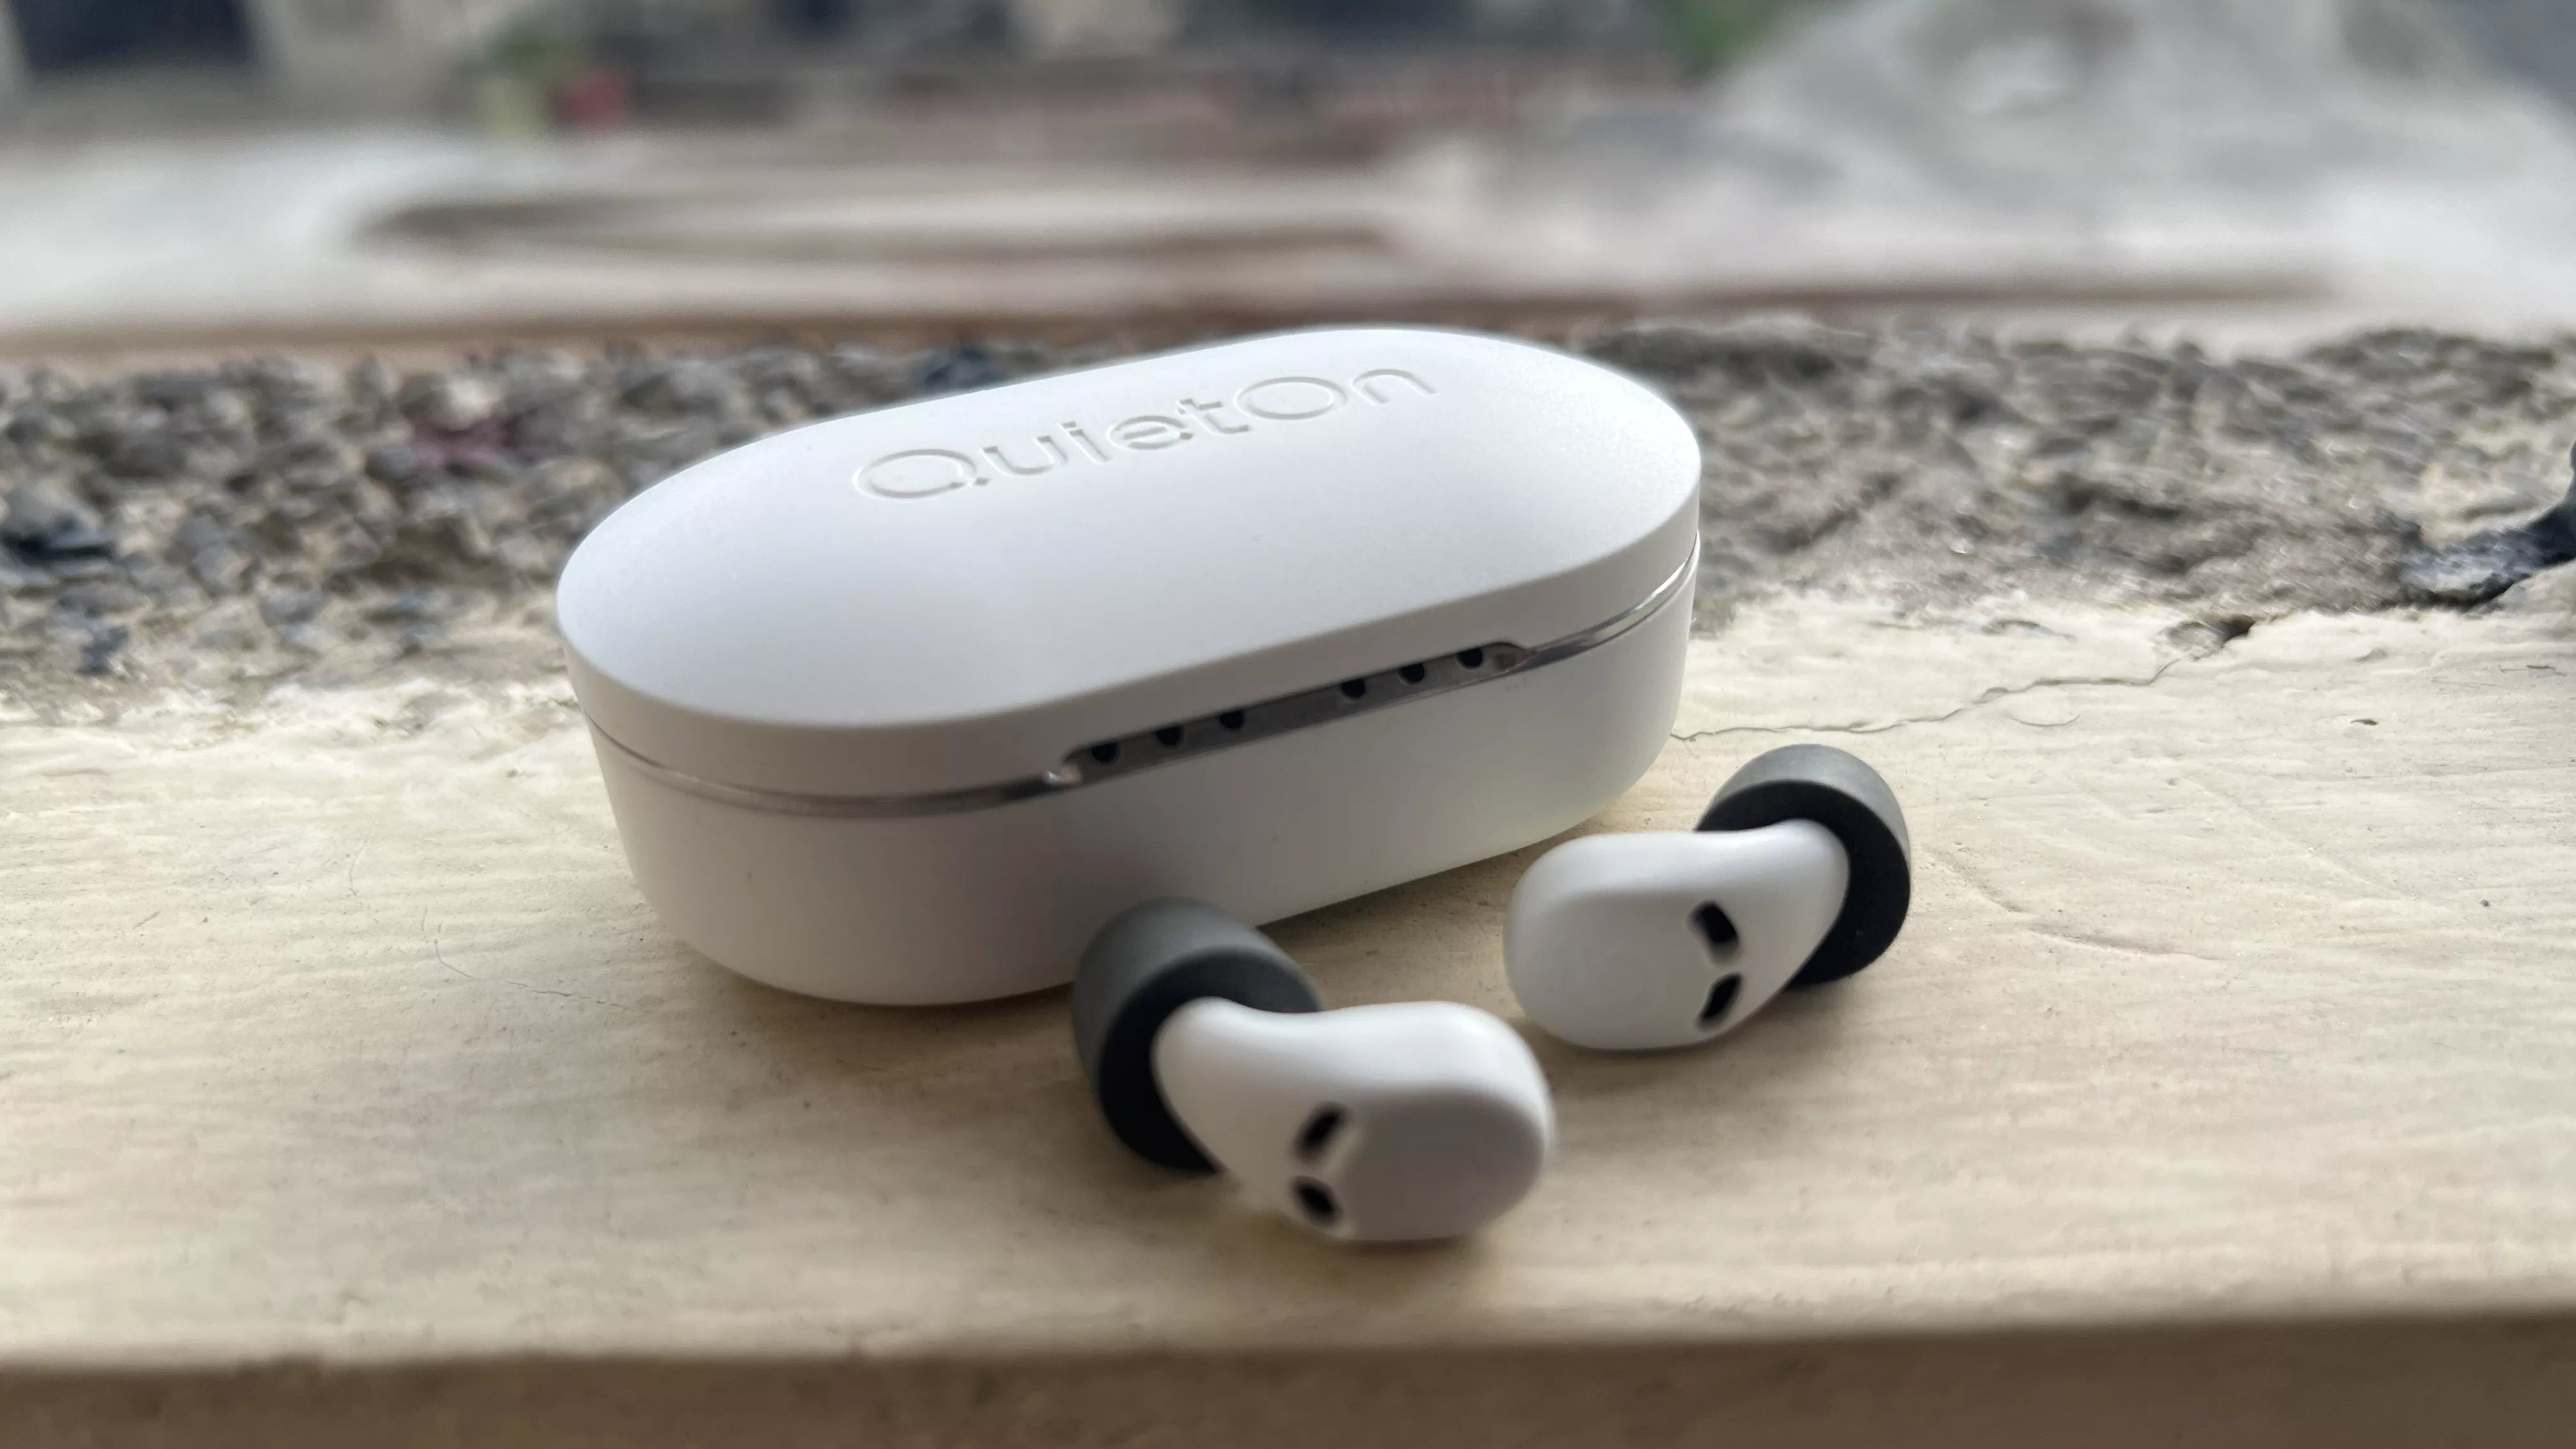 QuietOn3 earbuds outside charging case on the ground